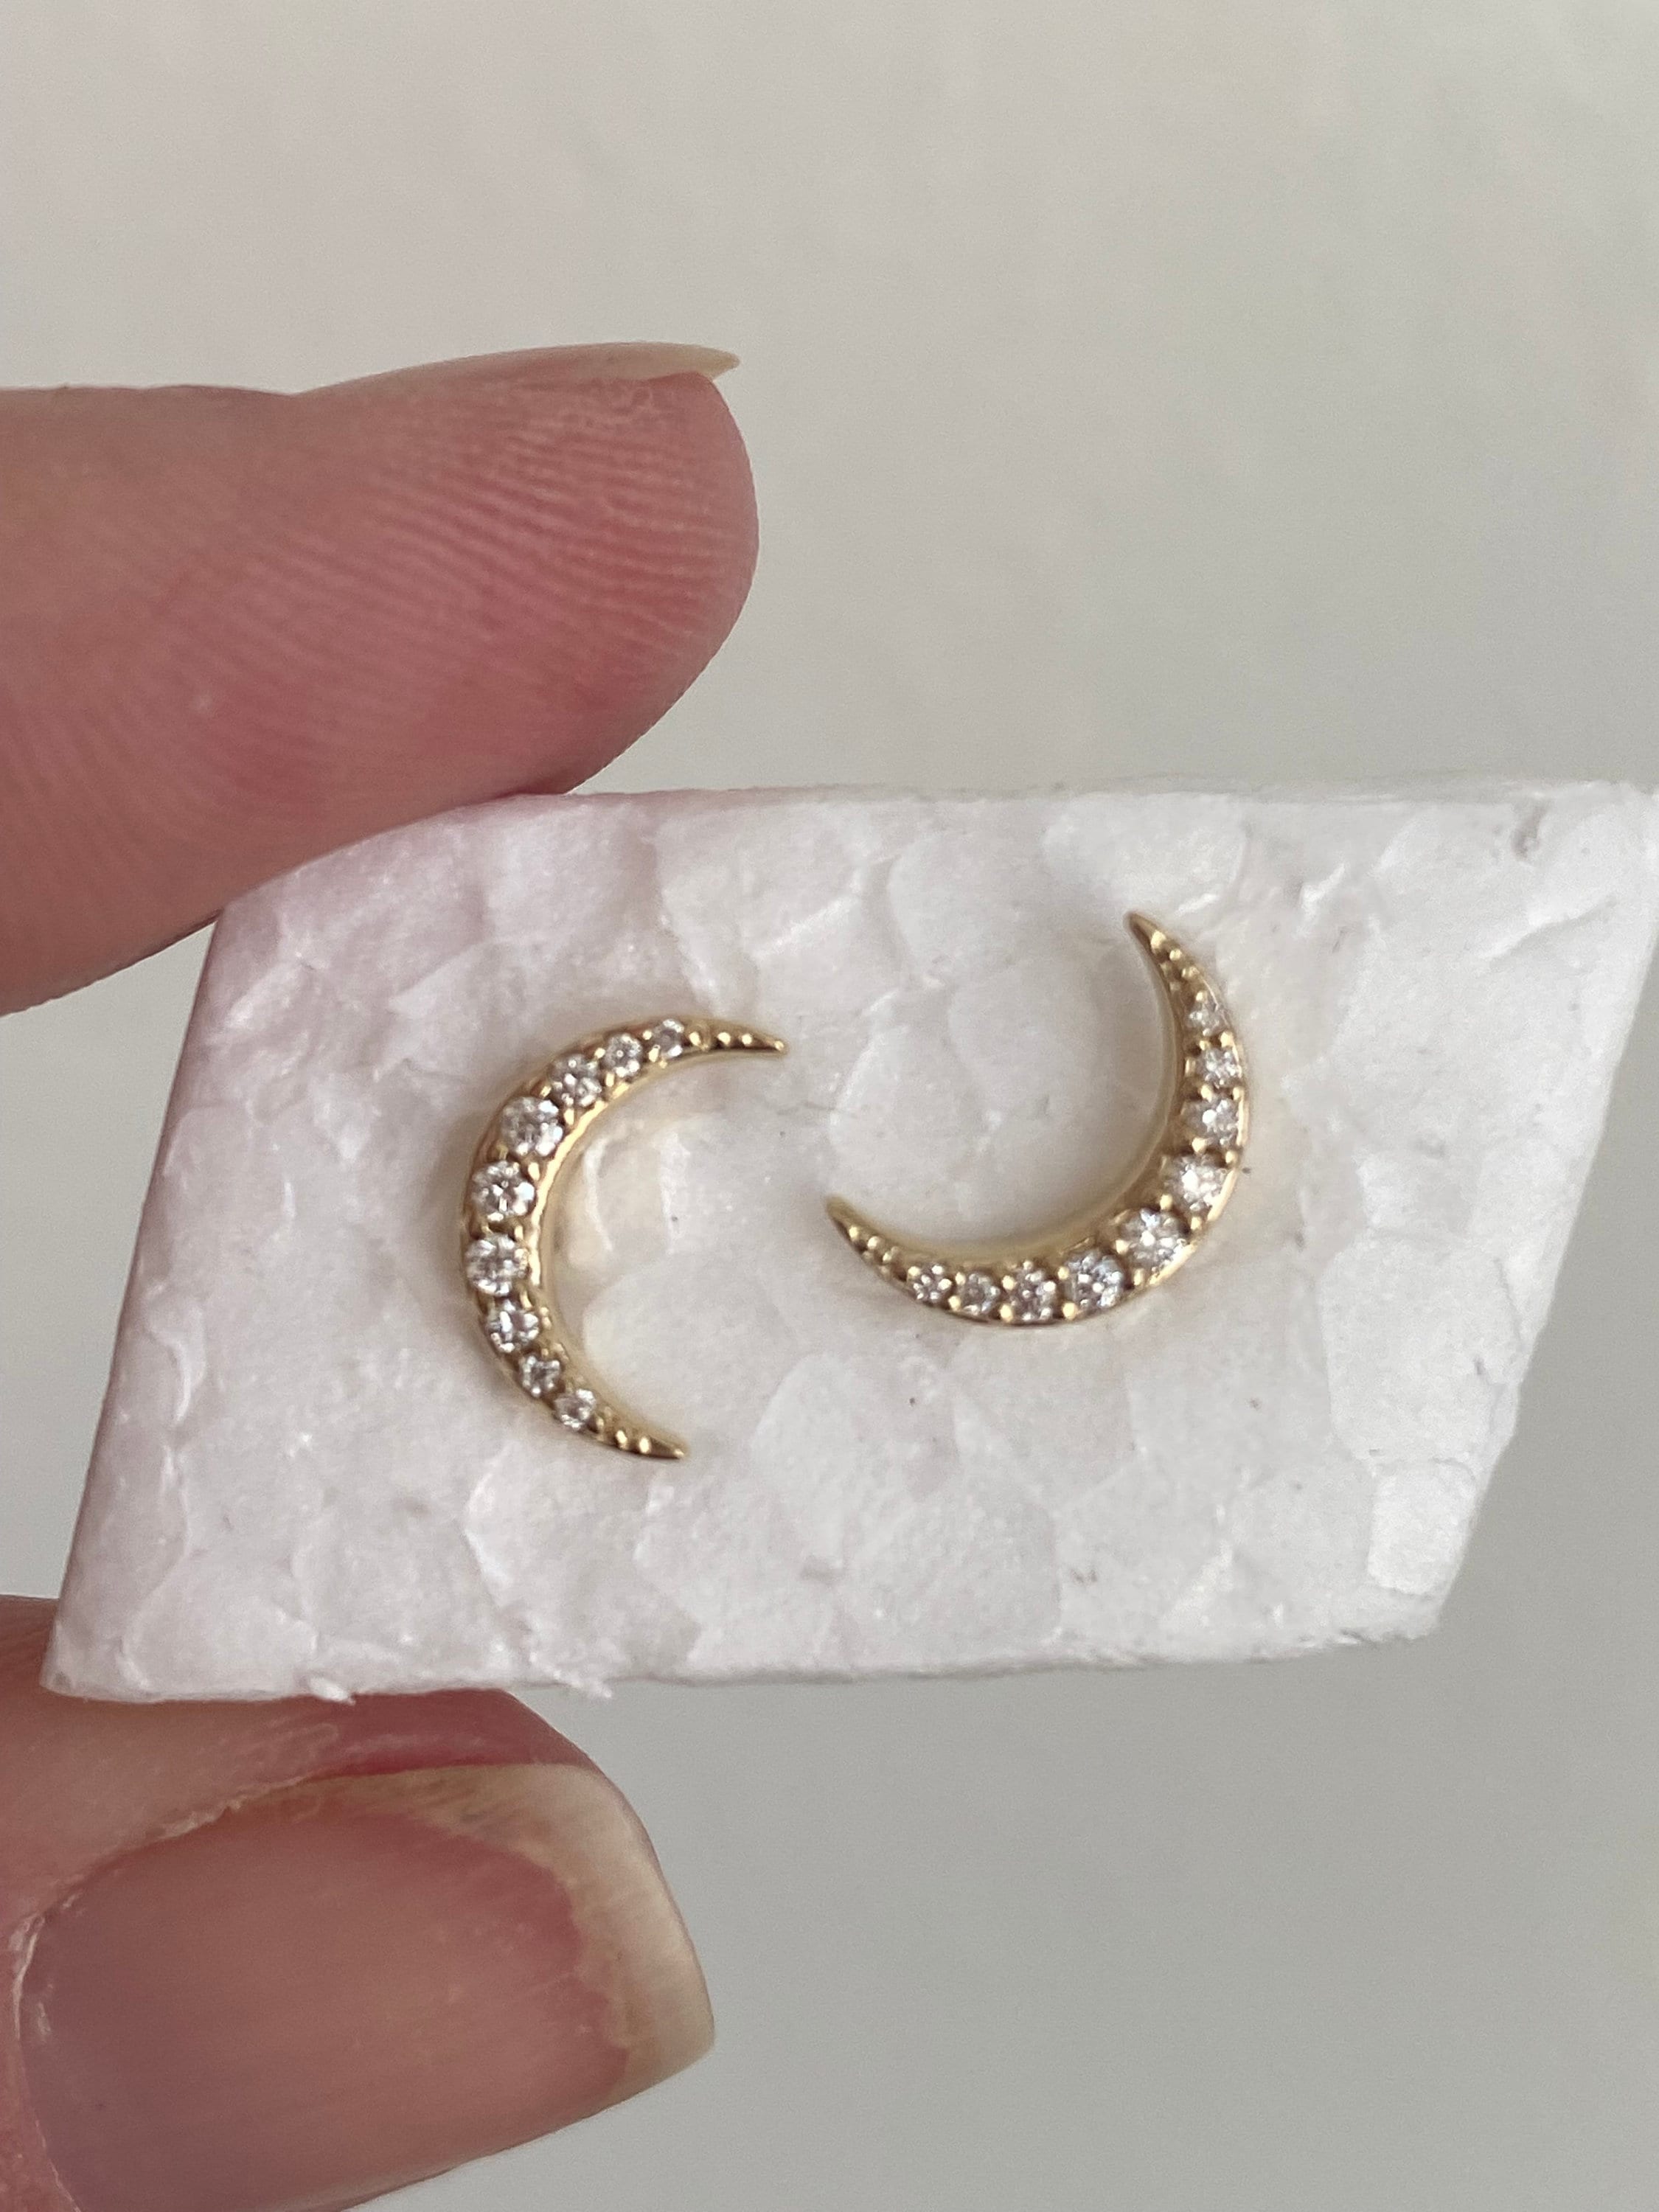 Crescent Moon Diamond Stud Earrings in Solid 14K Gold - White.